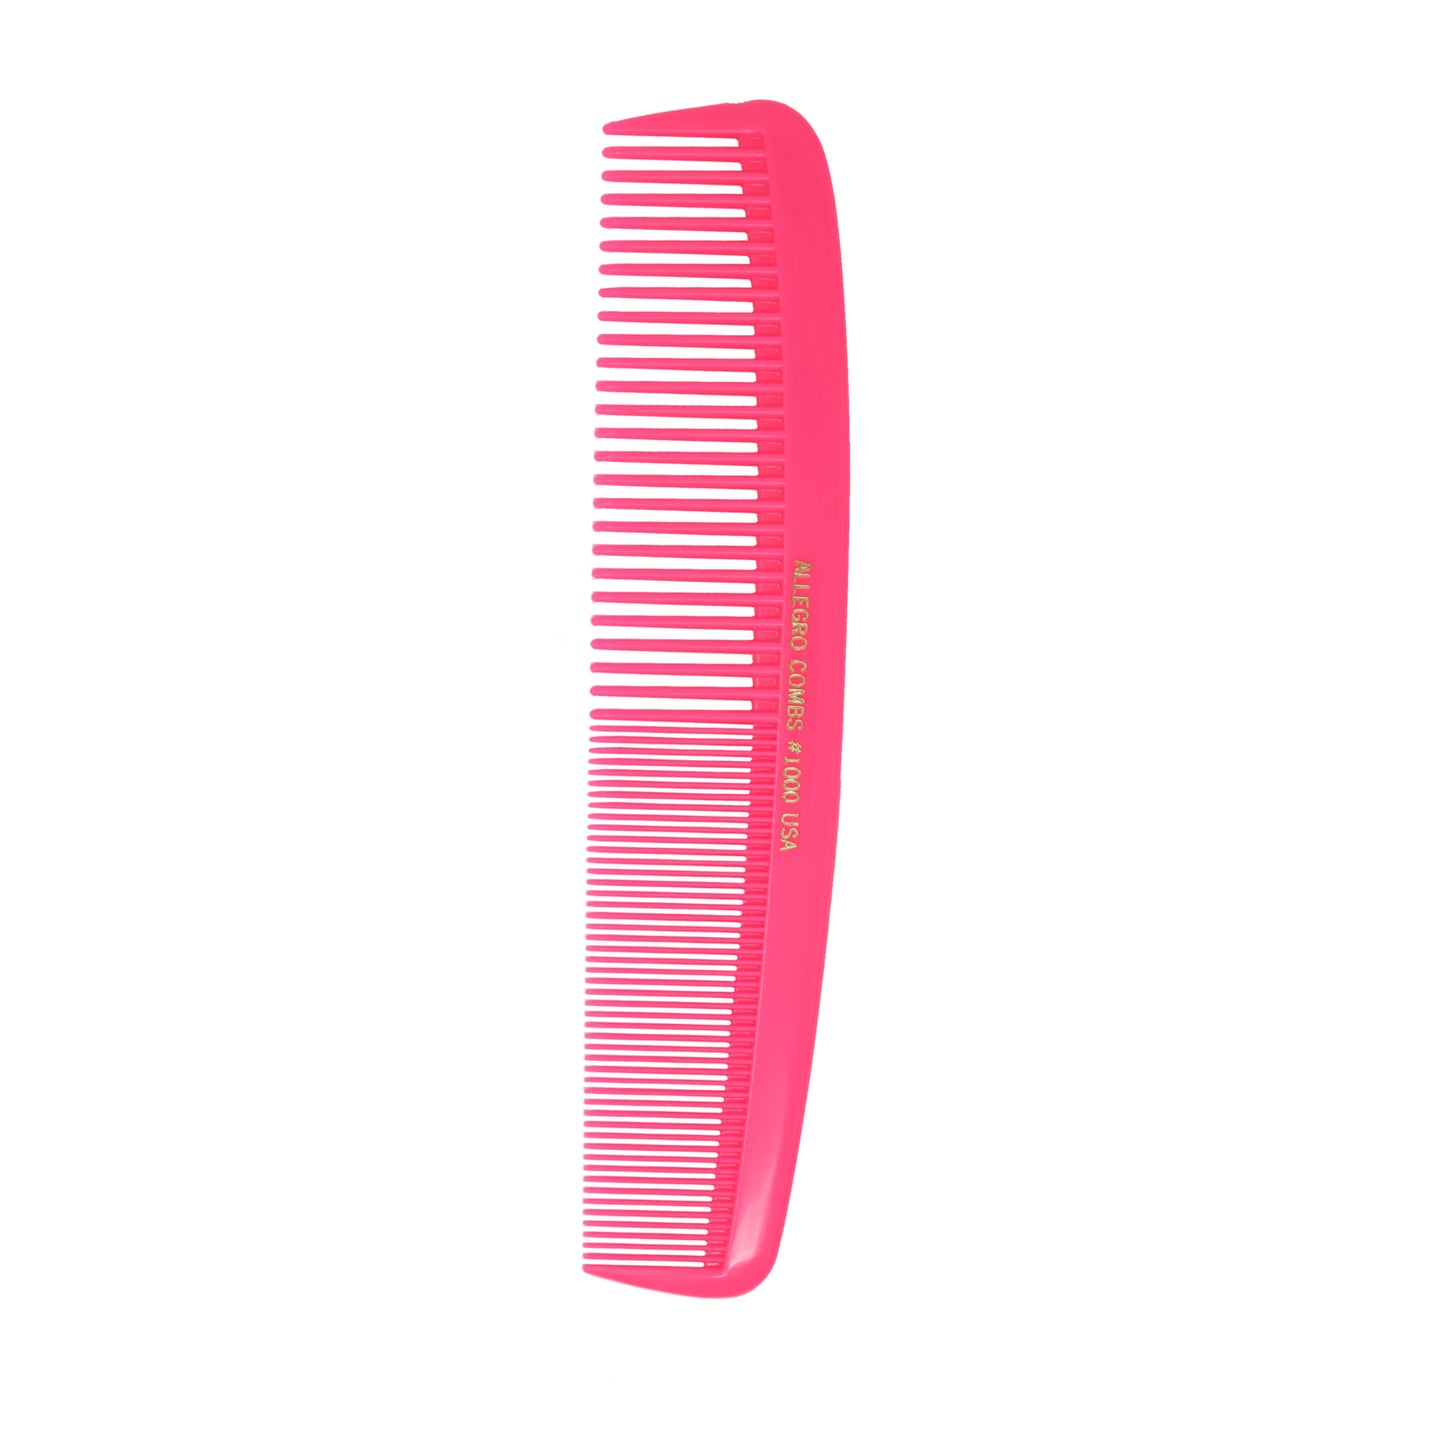 Allegro Combs 1000 X-Large Styling Comb Hair Cutting Barber Stylist Combs All Purpose Wide And Fine Tooth 1 Unit